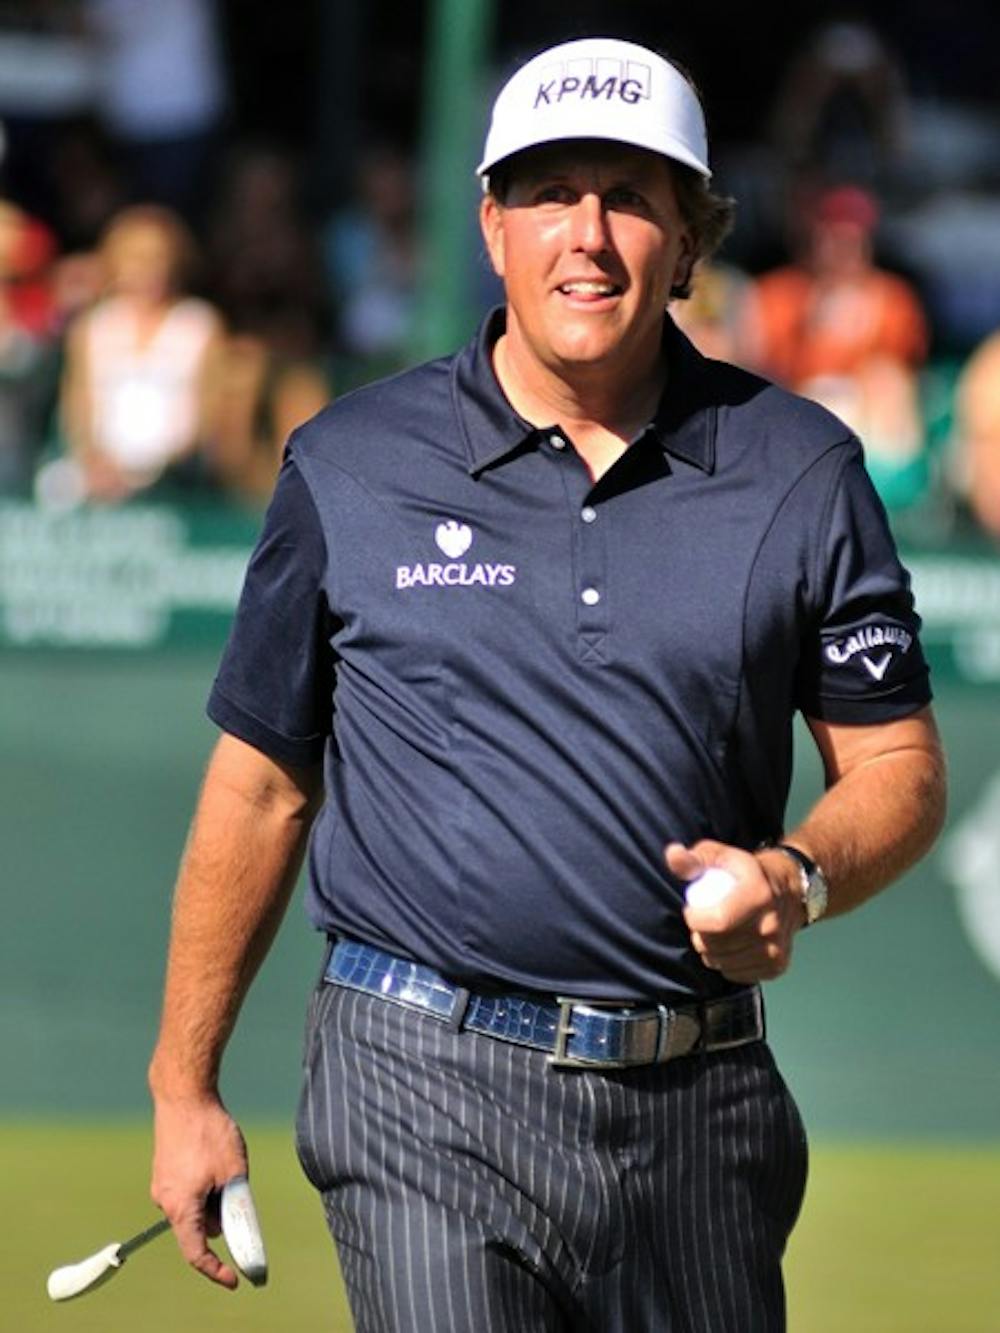 ASU alumnus Phil Mickelson reacts to a welcoming crowd Sunday at the Waste Management Phoenix Open in Scottsdale. (Photo by Aaron Lavinsky)